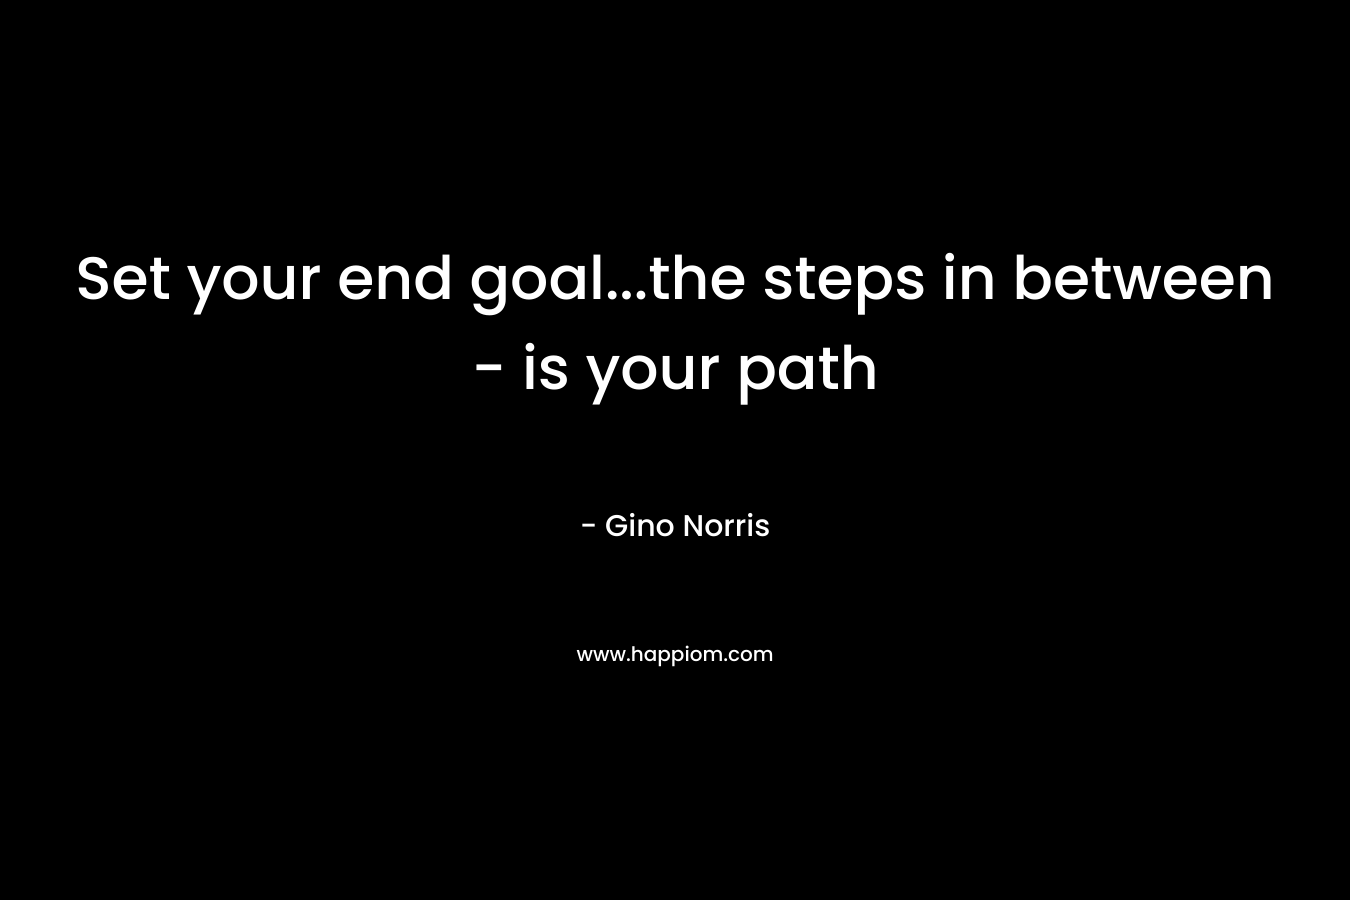 Set your end goal...the steps in between - is your path